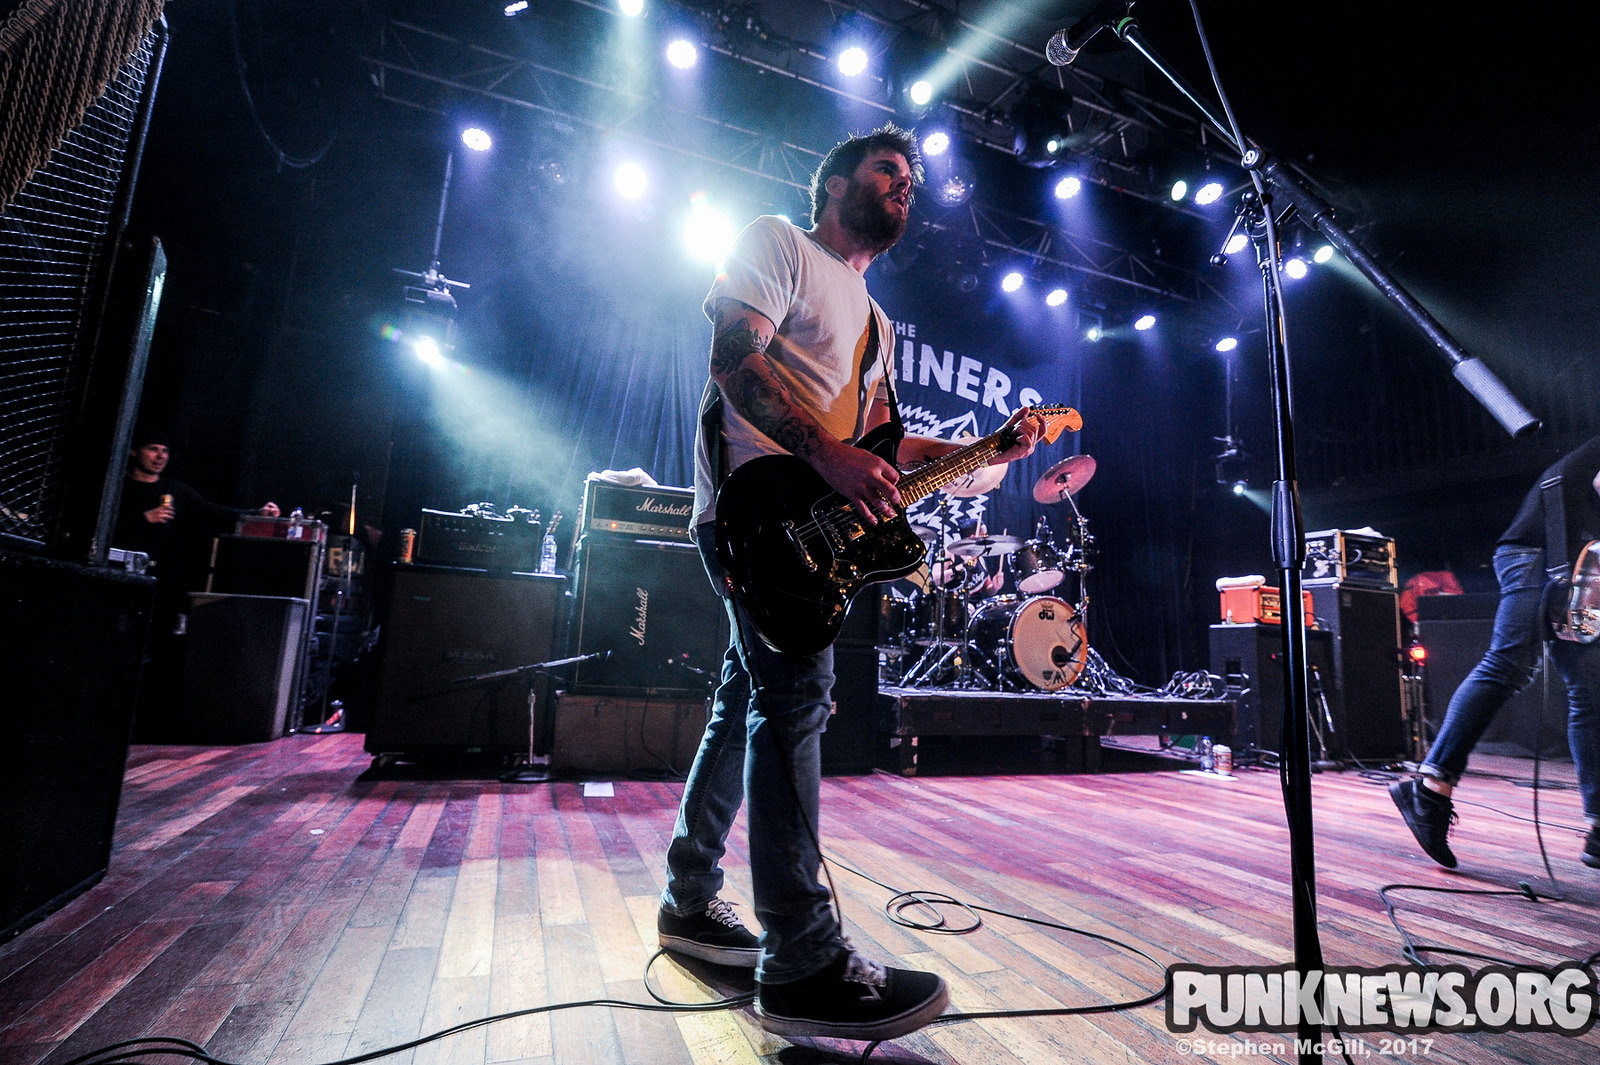 The Flatliners at The Opera House, 12/07